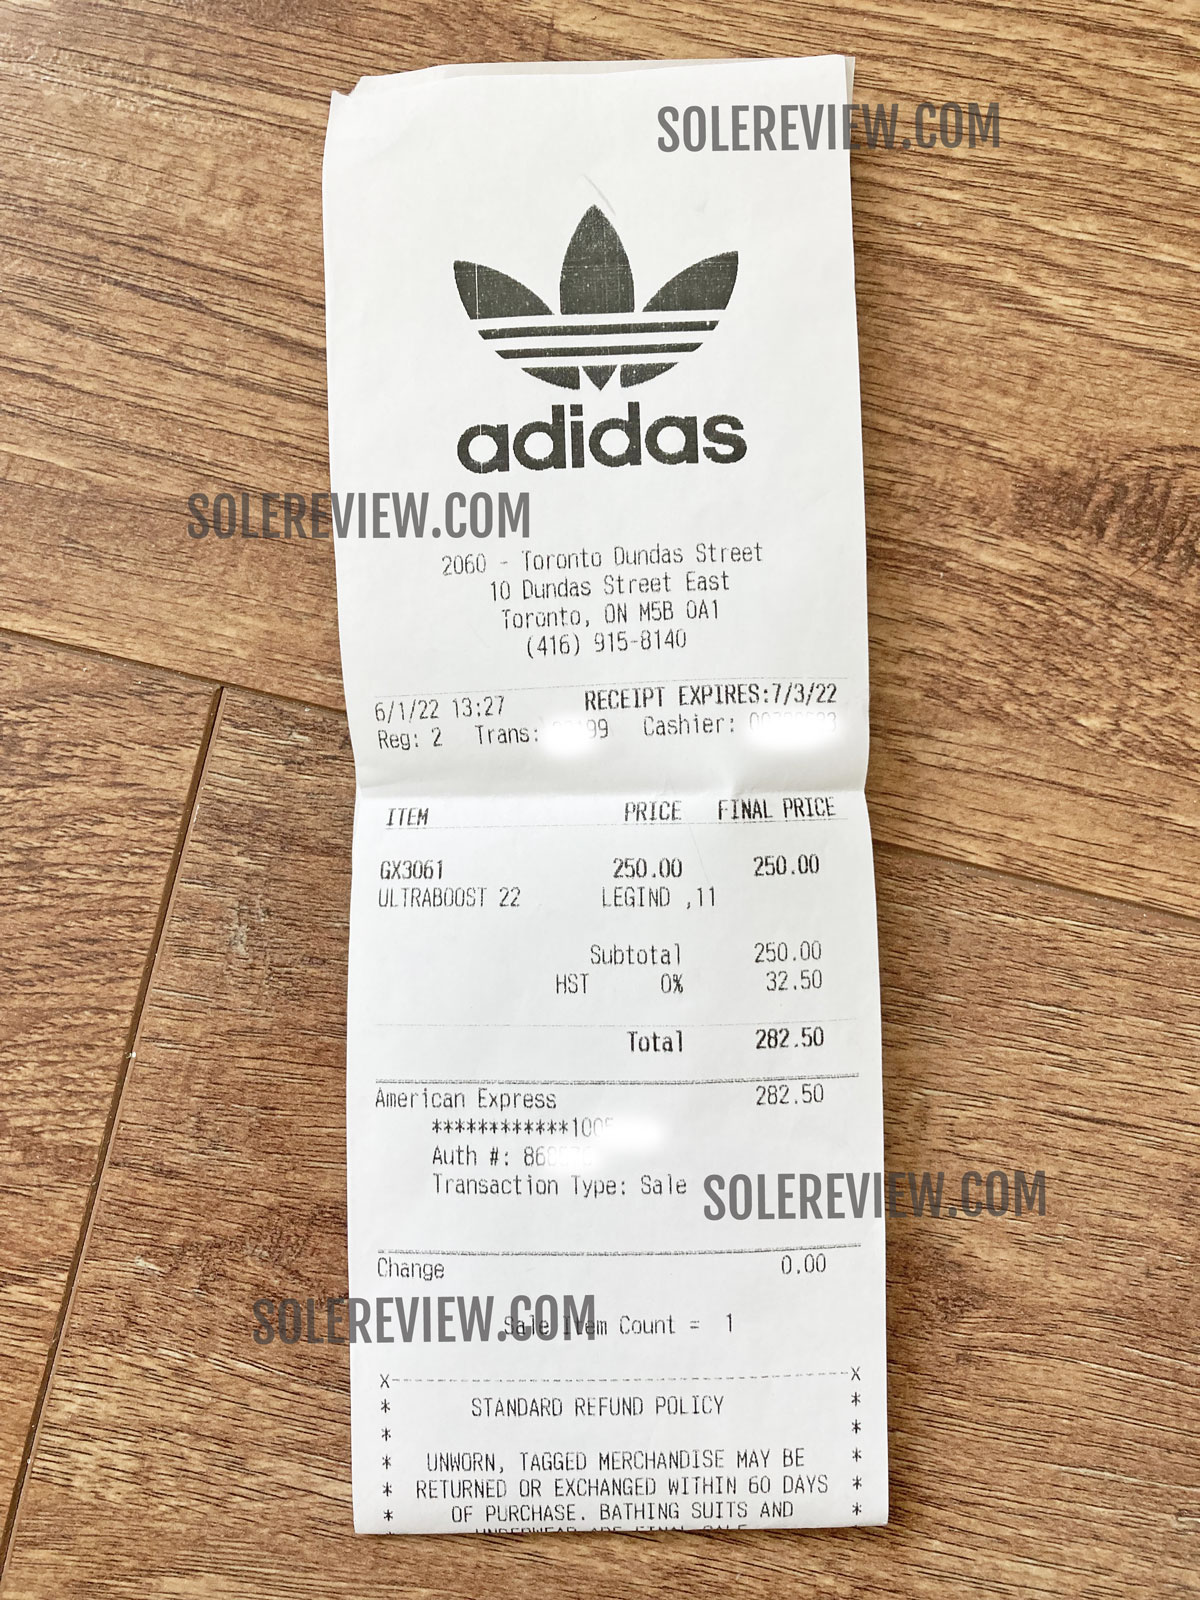 Adidas Ultraboost DNA Review, Facts, Comparison